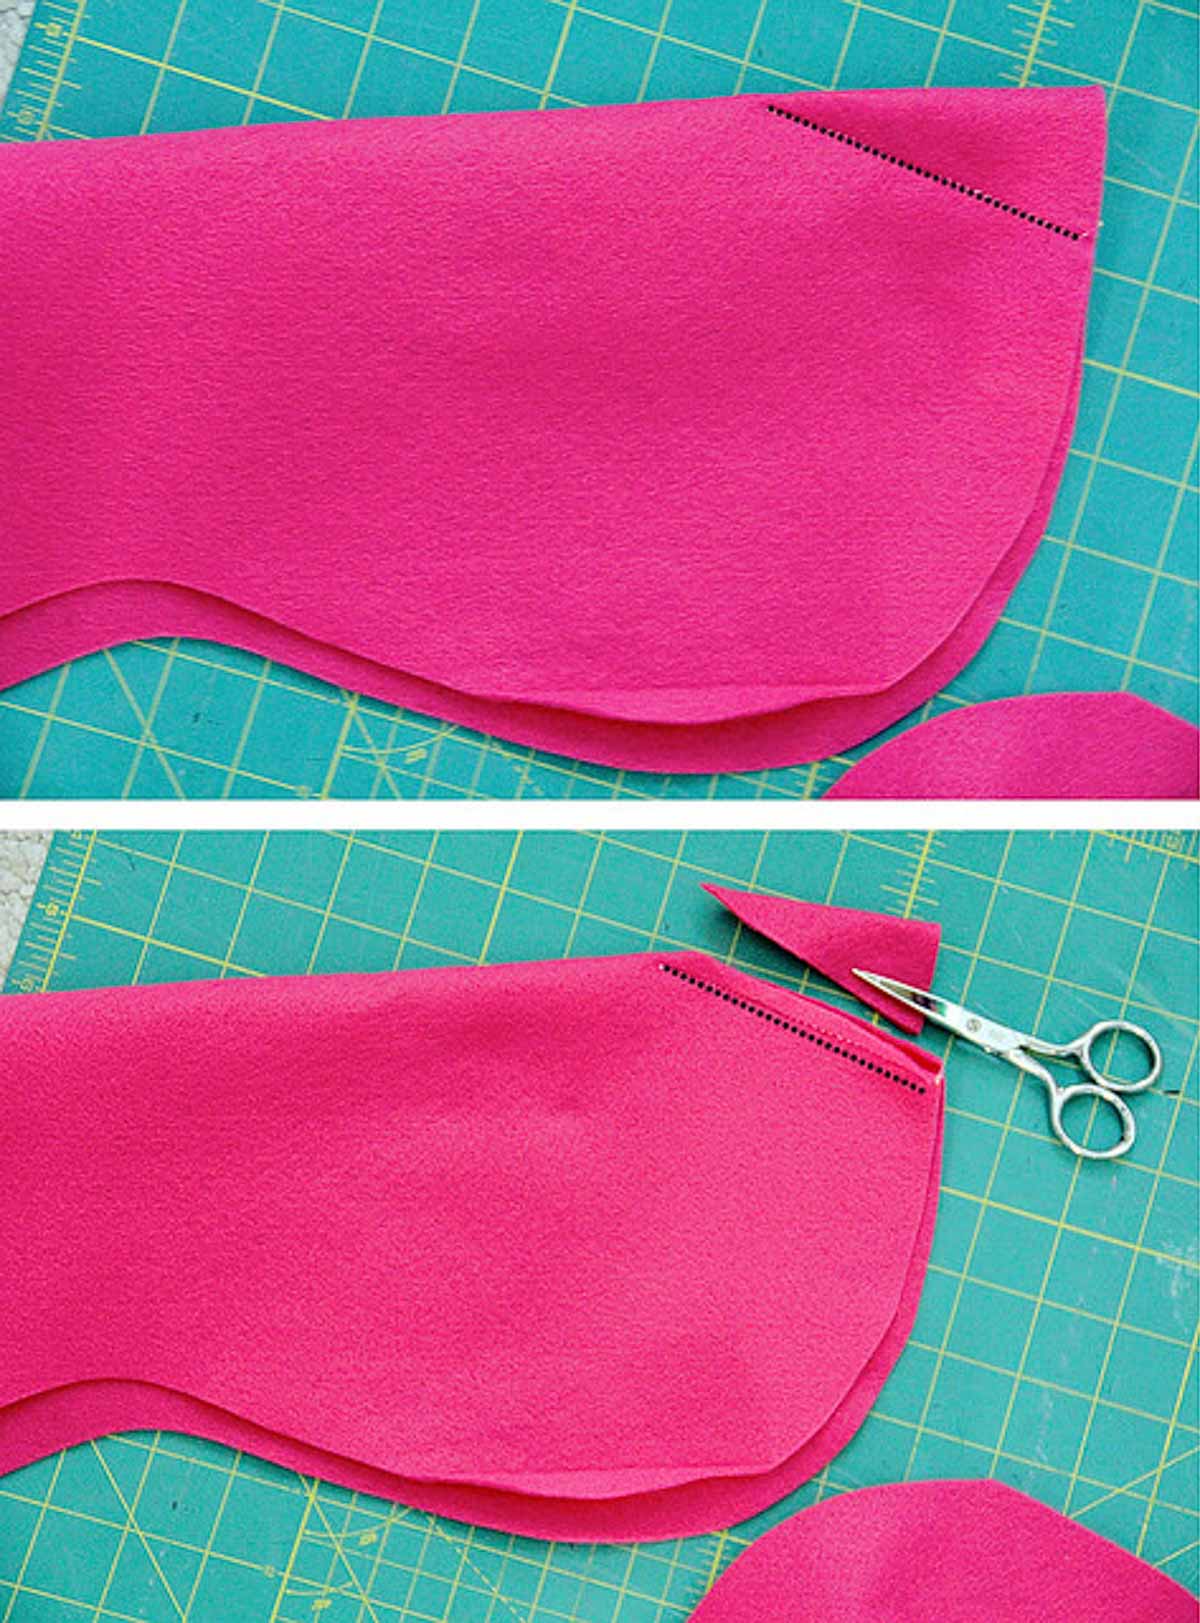 Image of where to sew the dart and where to trim excess fabric.